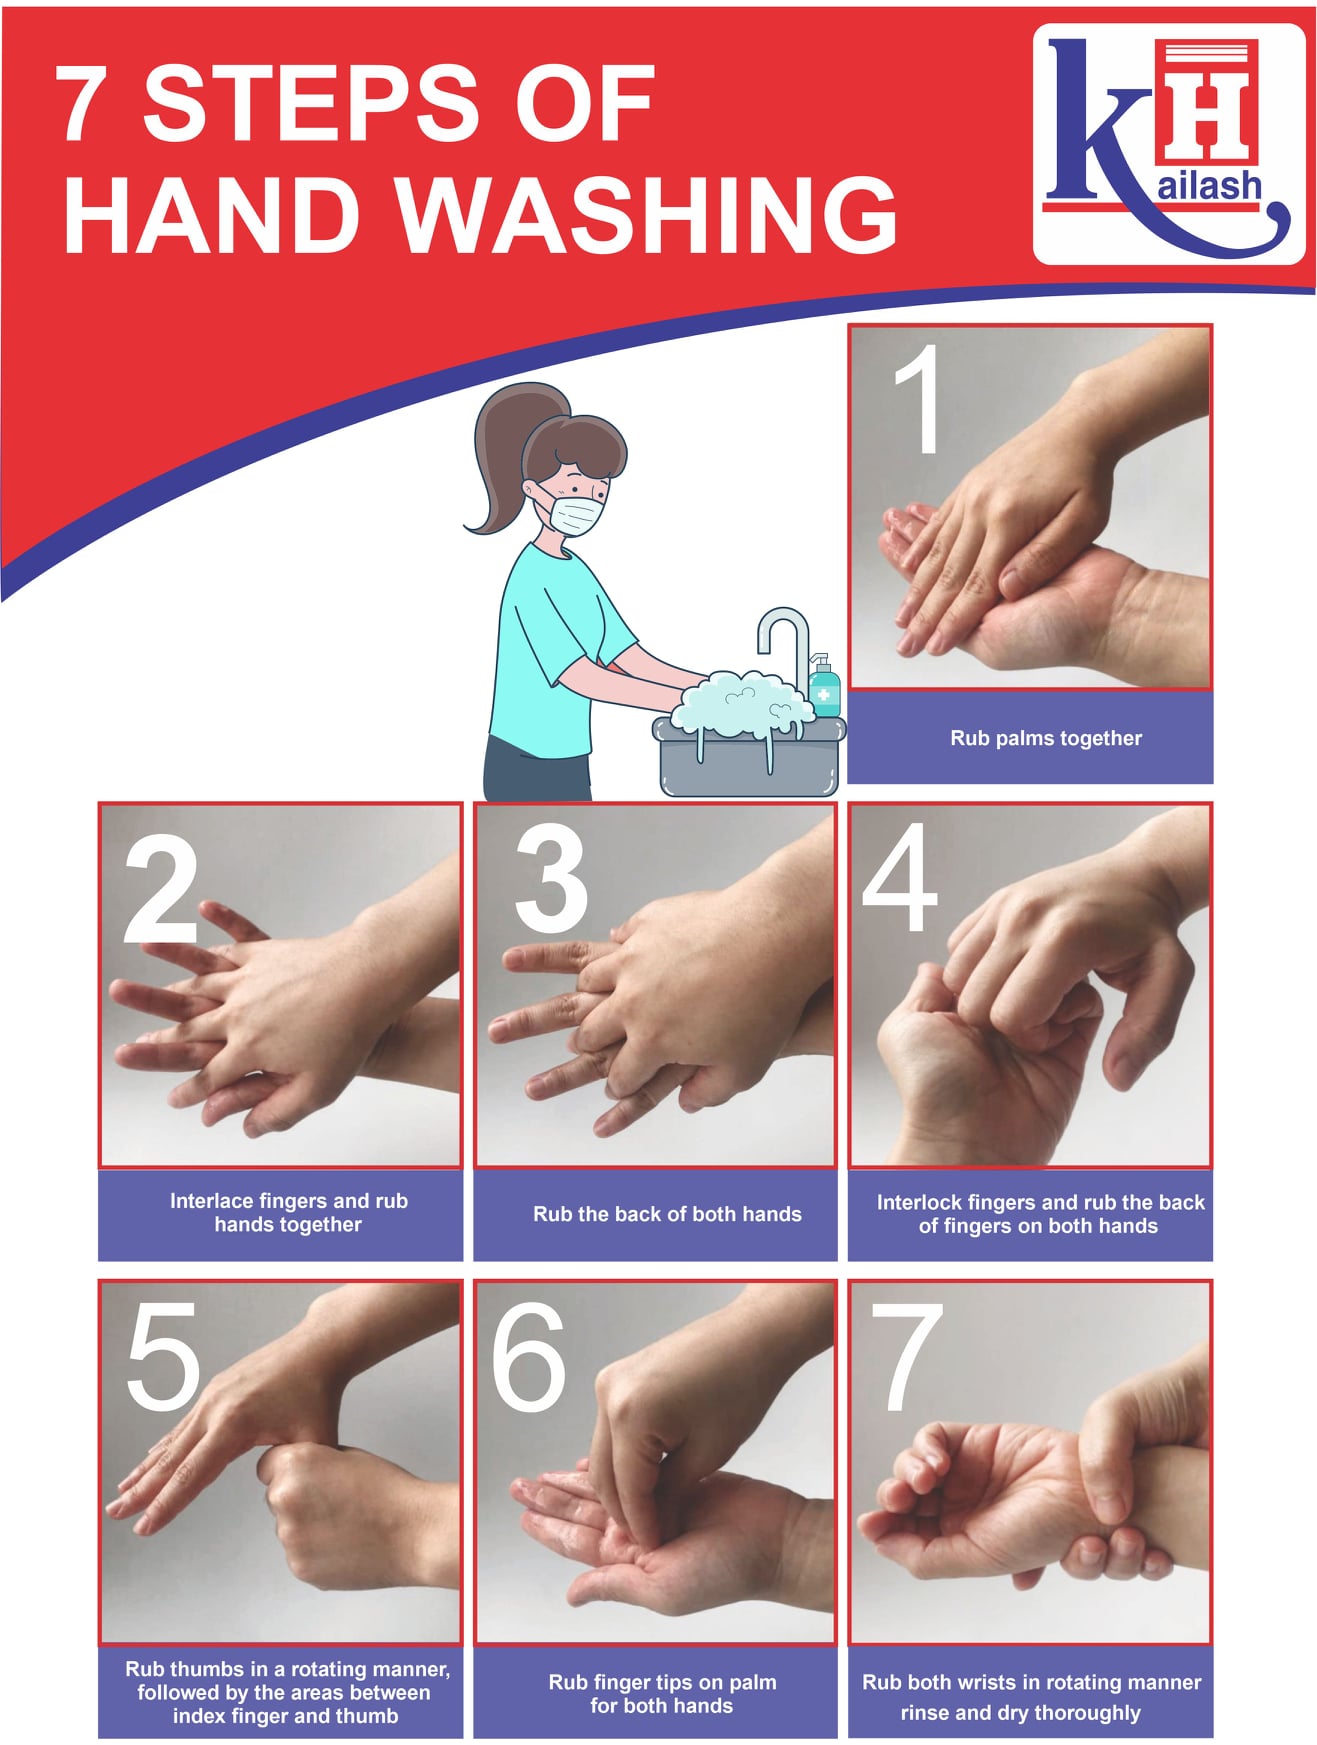 Proper Handwashing is one of the strongest means to fight back any infection and stay safe.